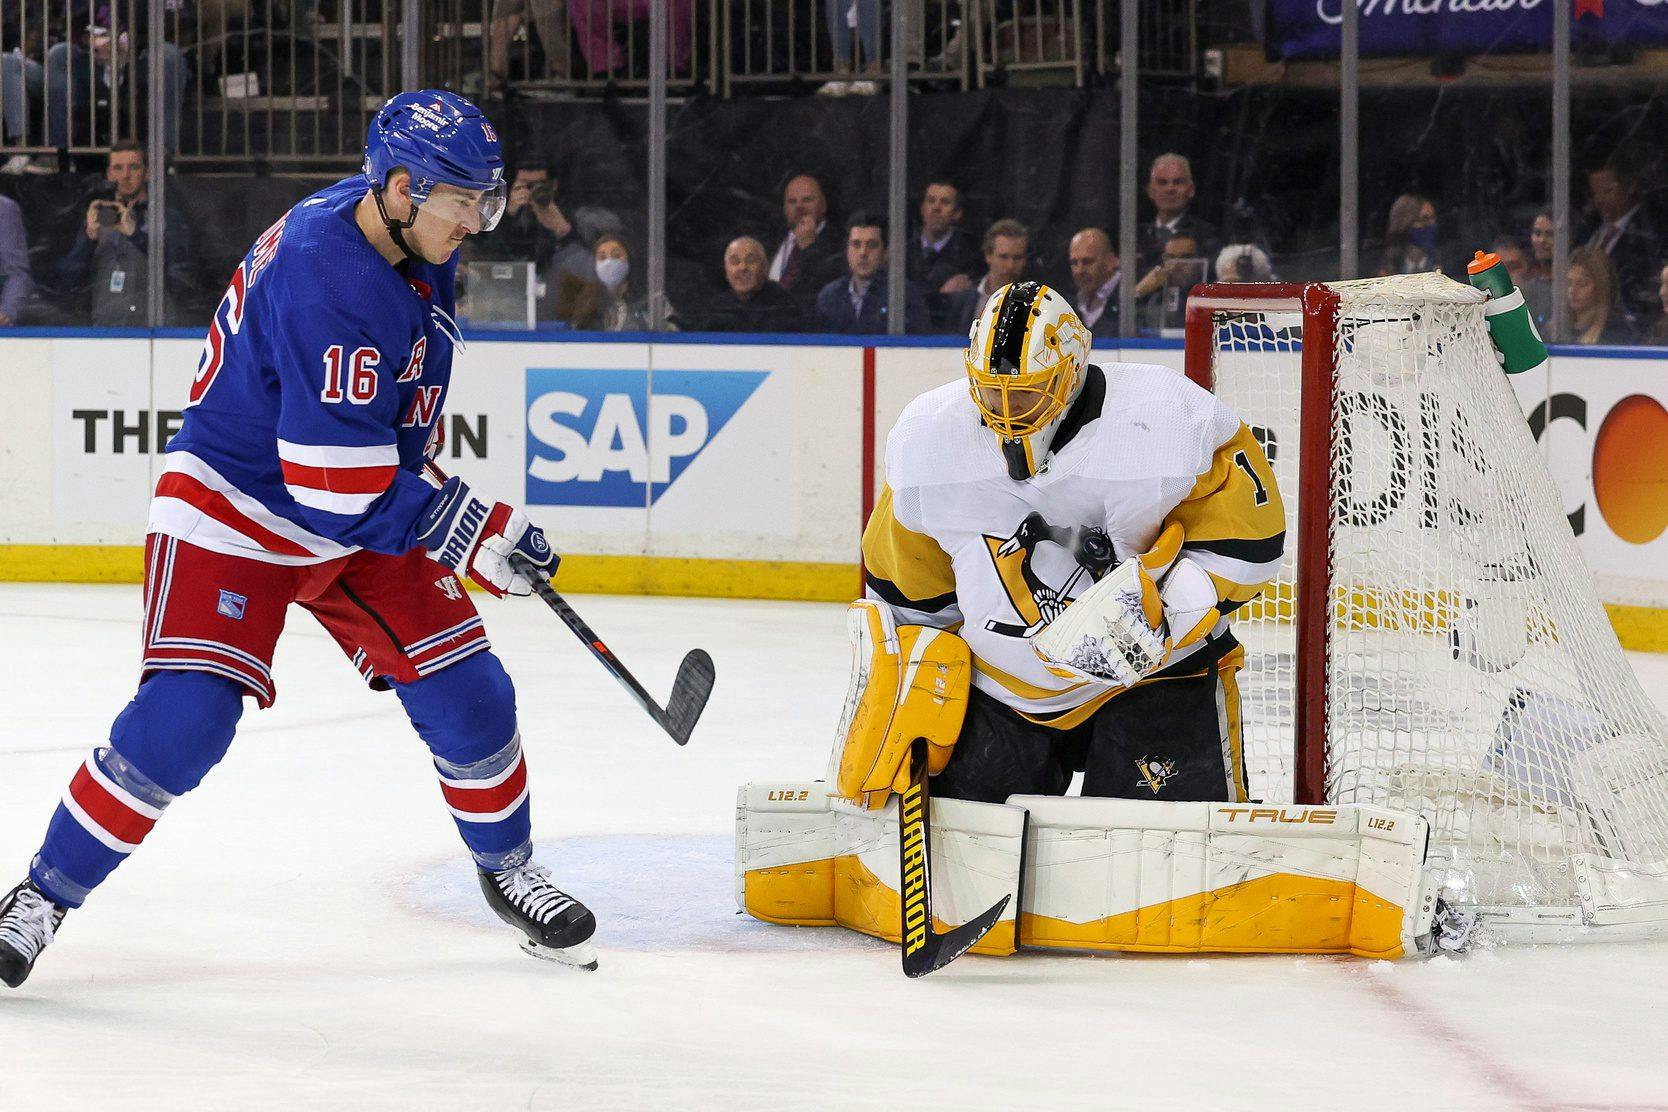 Casey DeSmith unlikely to be available for the Pittsburgh Penguins against the New York Rangers